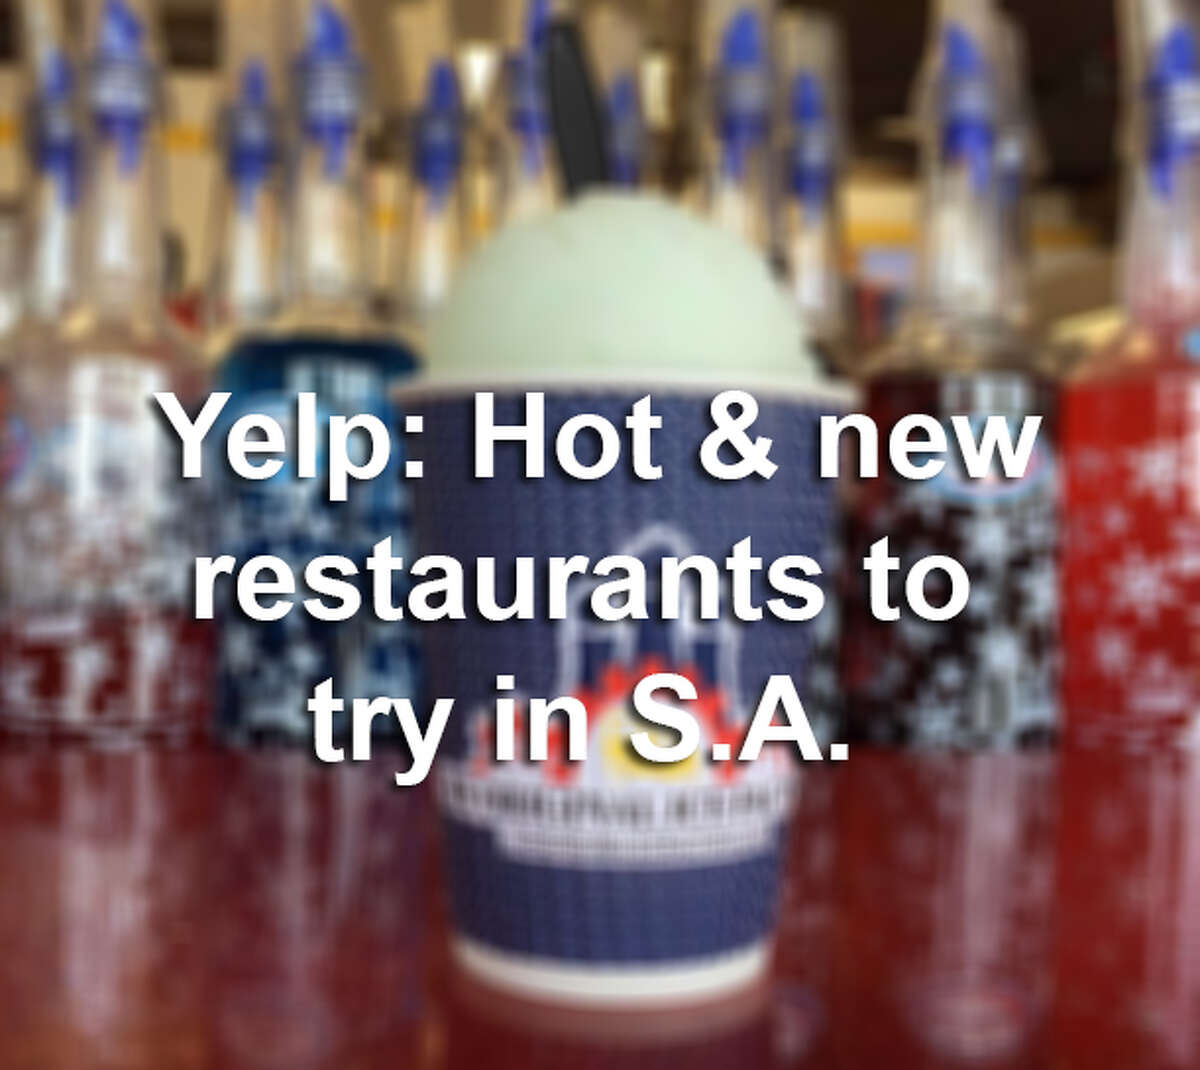 Click ahead to find out the best new restaurants in San Antonio, according to Yelp users.